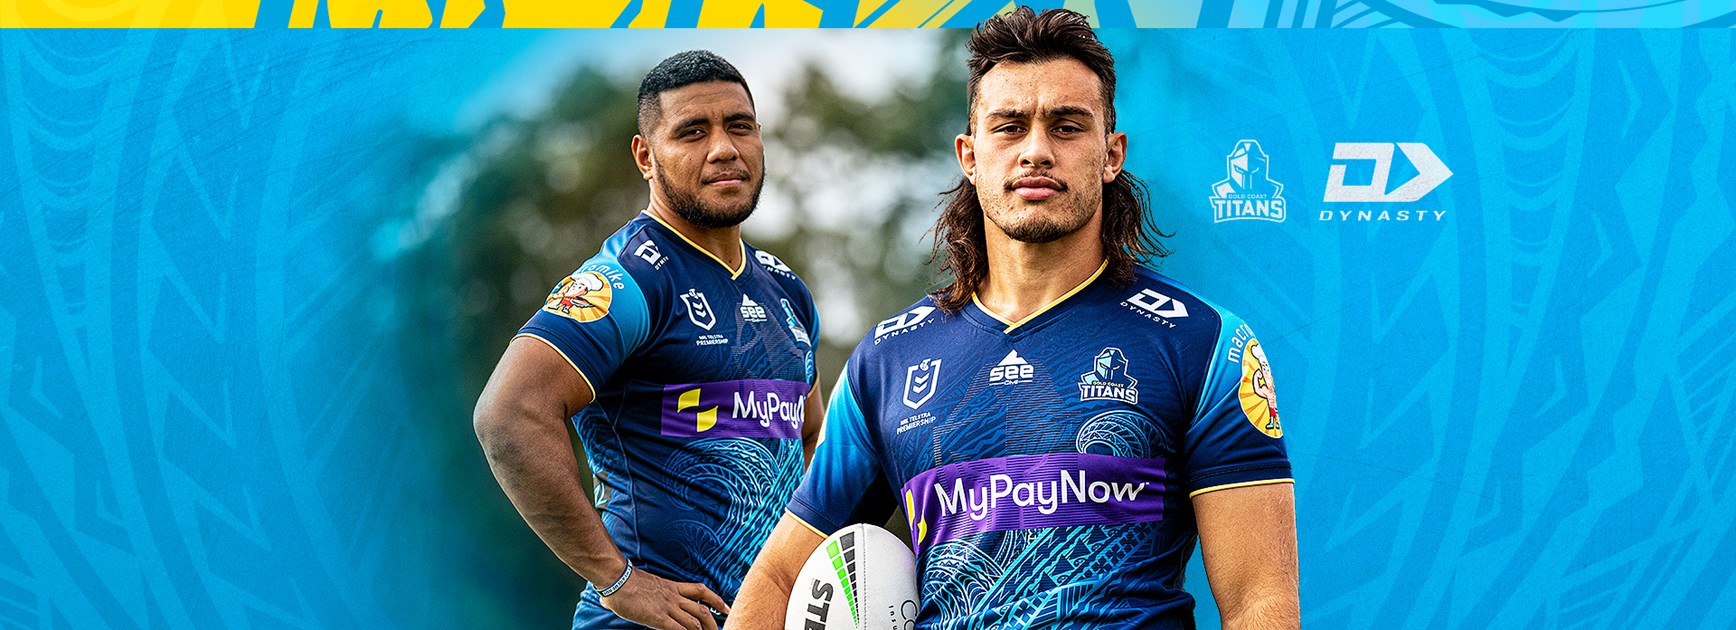 Titans & Dynasty launch first ever Pasifika jersey